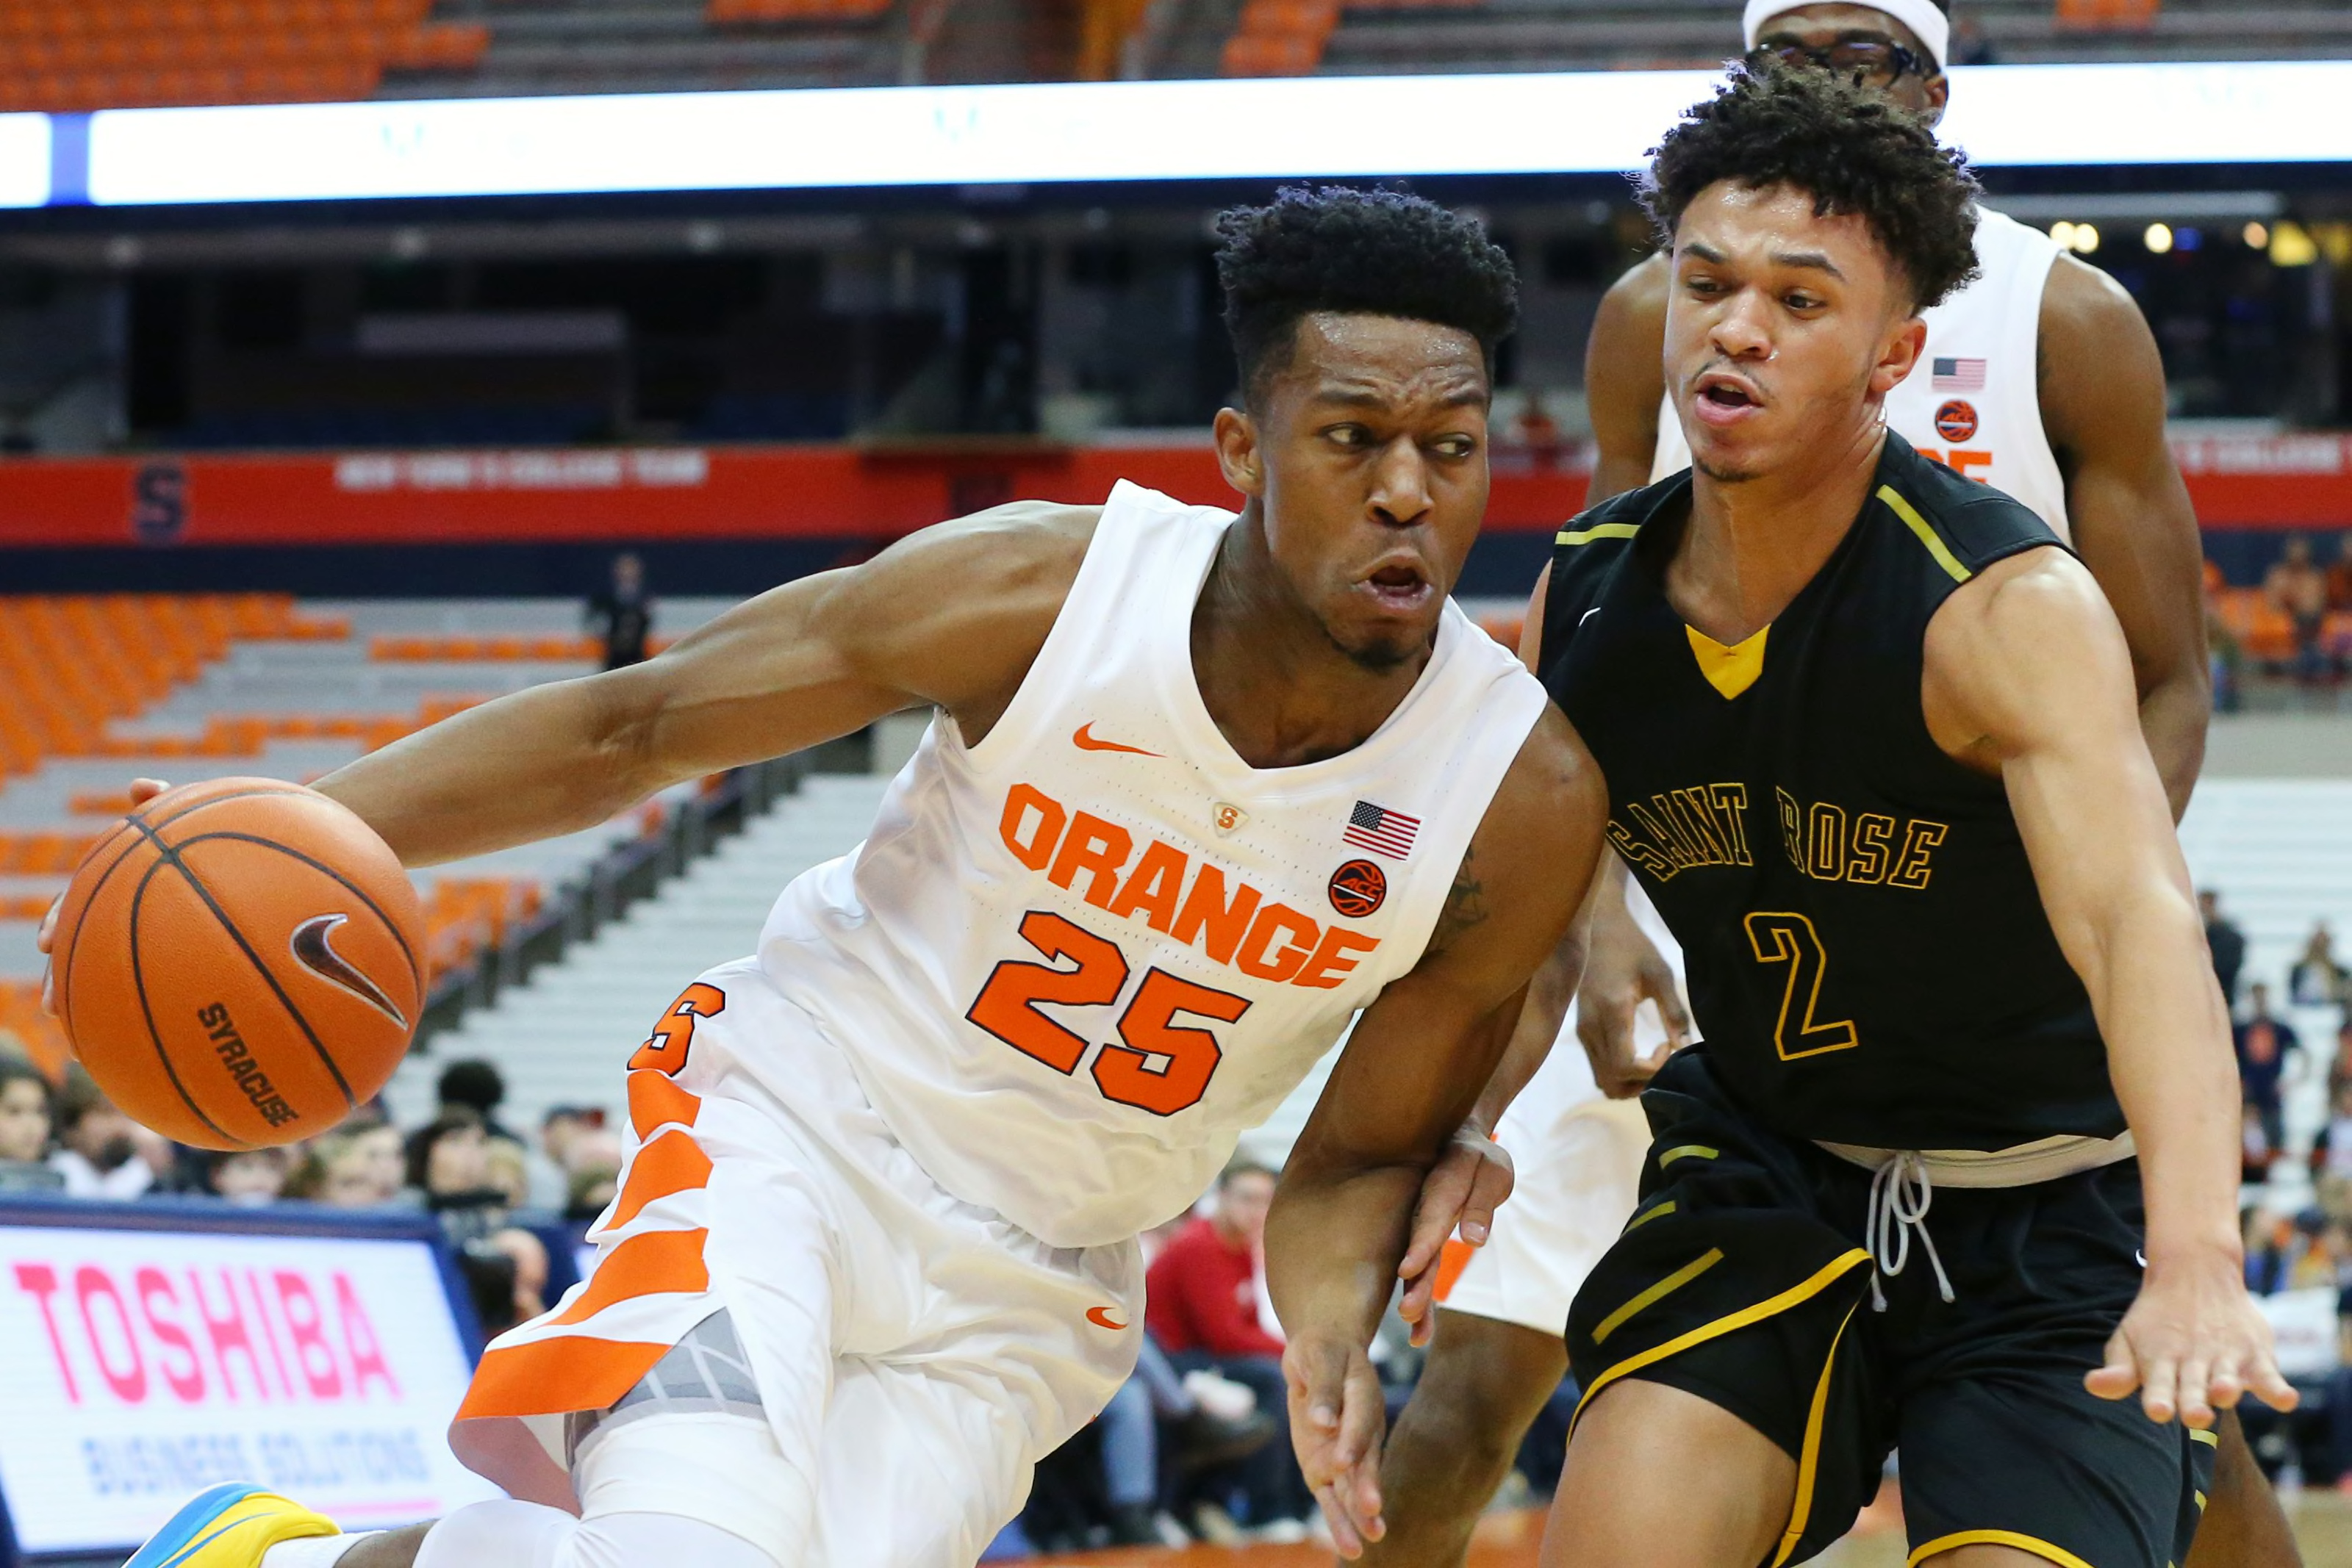 Syracuse Basketball 201819 season preview for the Orange Page 2